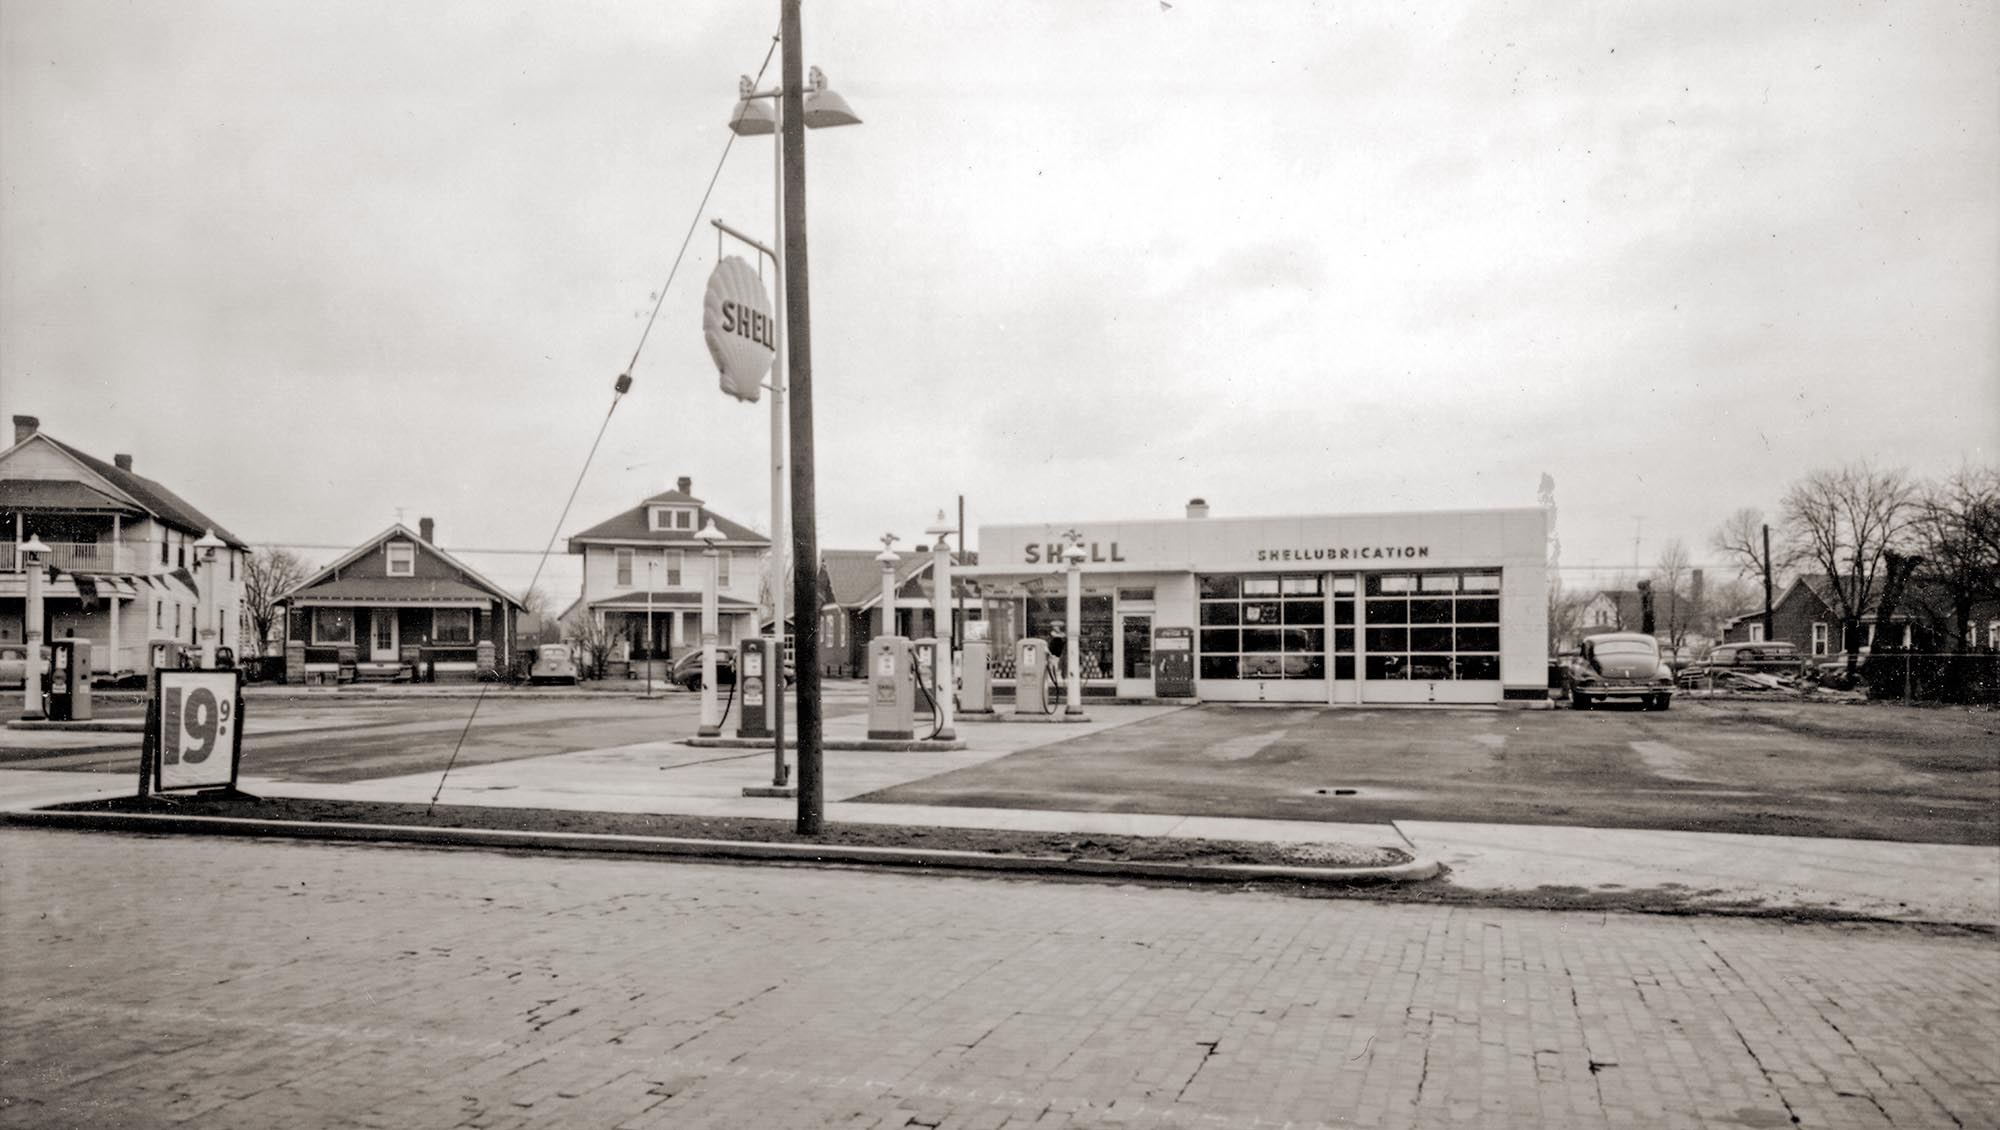 Shell Station at 1921 North Peoria Road (Old Route 66) in Springfield, Illinois, 1953.